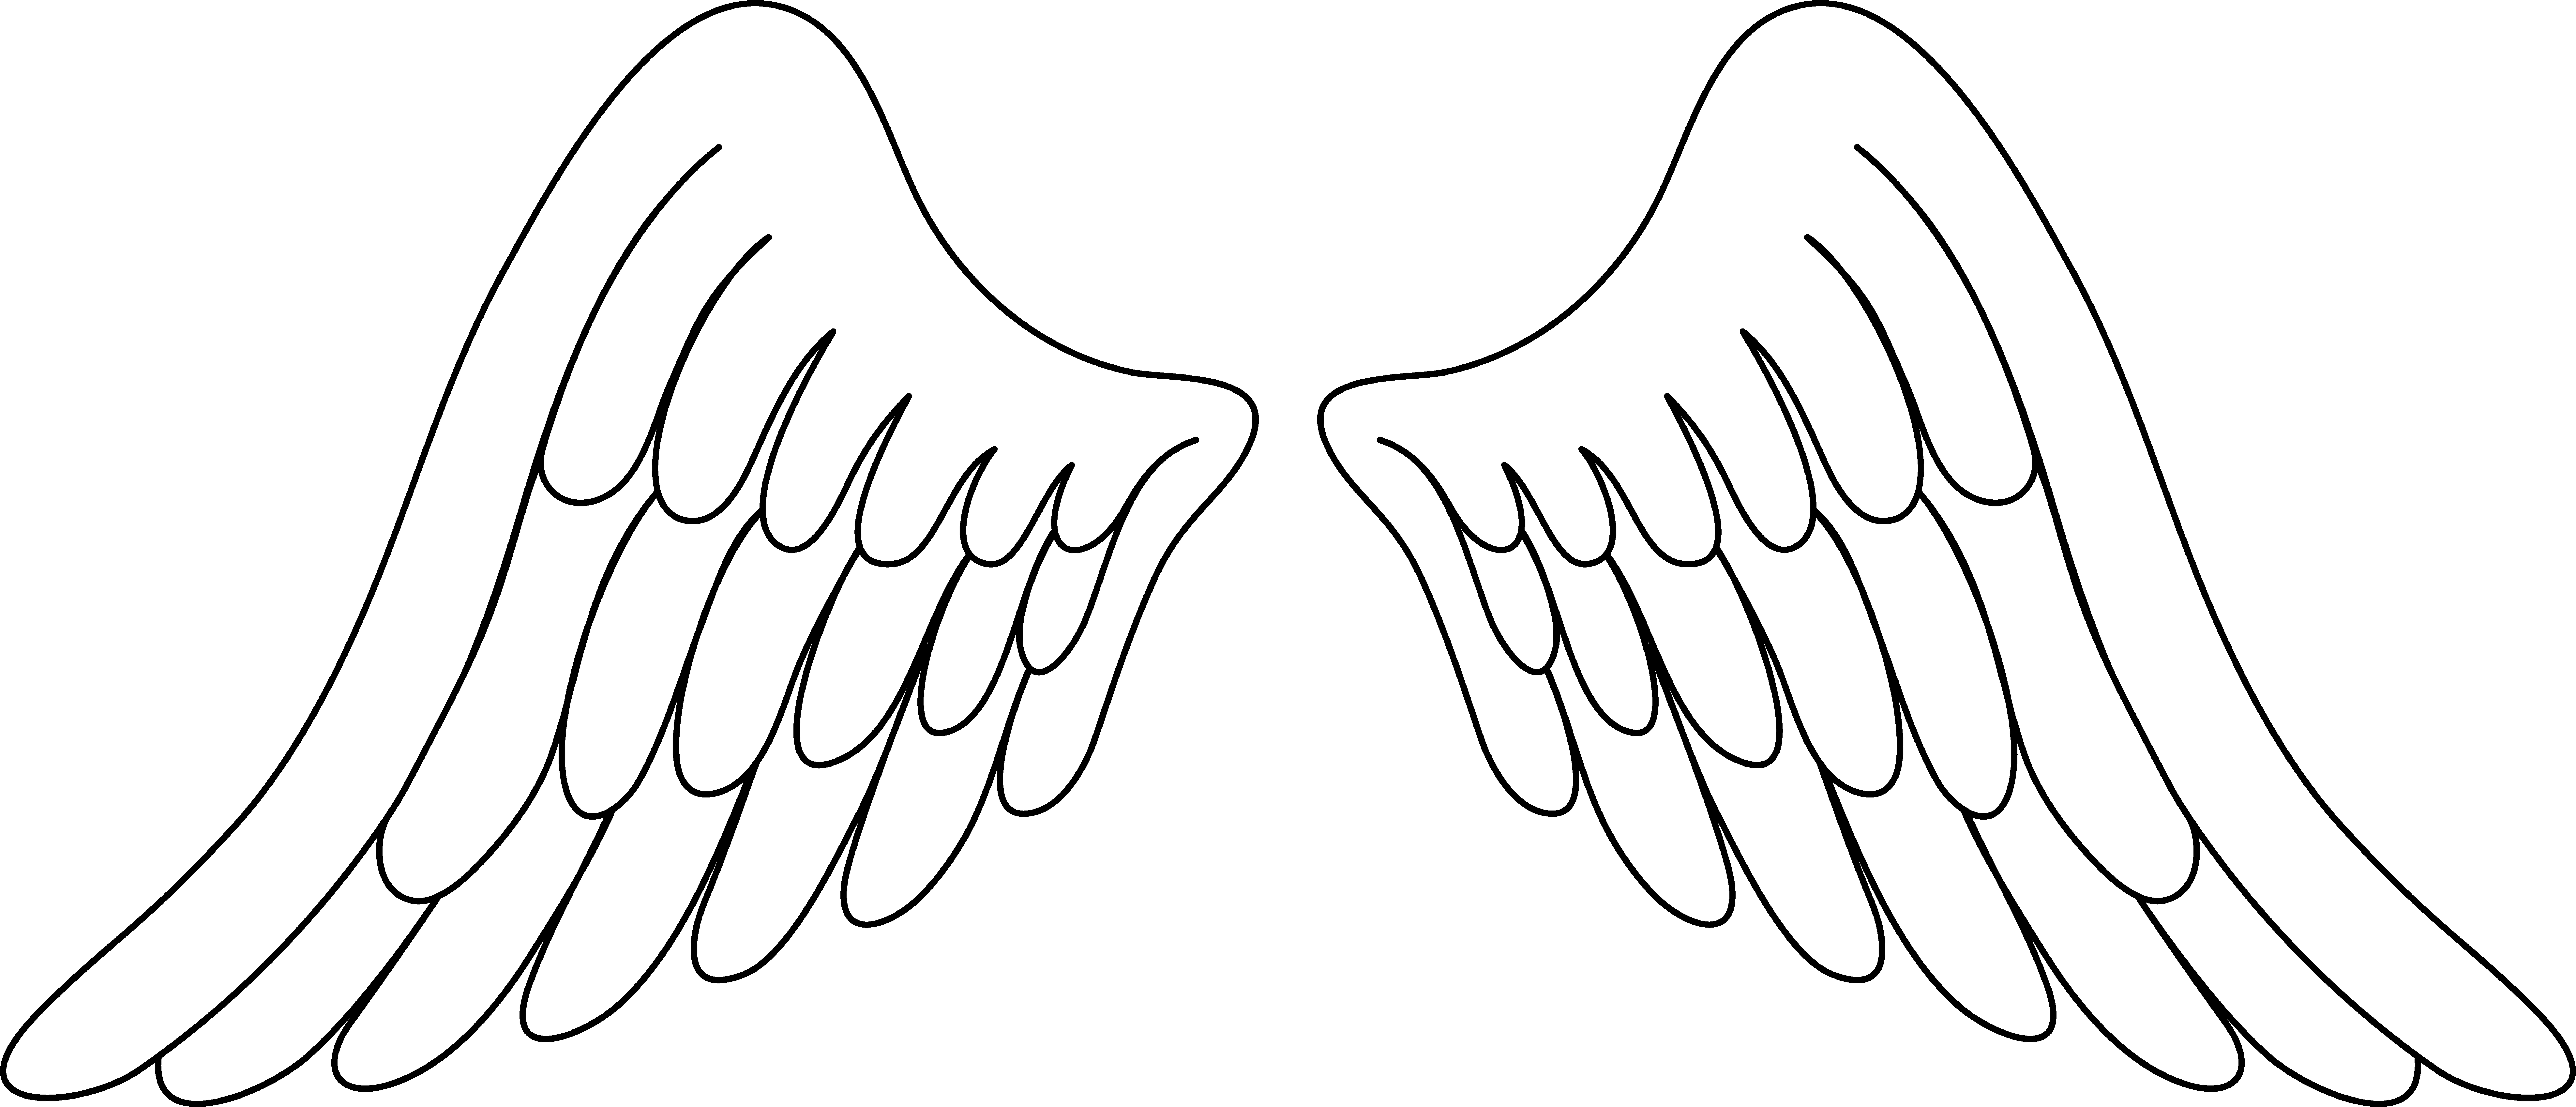 Handshake clipart outline. Angel wings wing clip